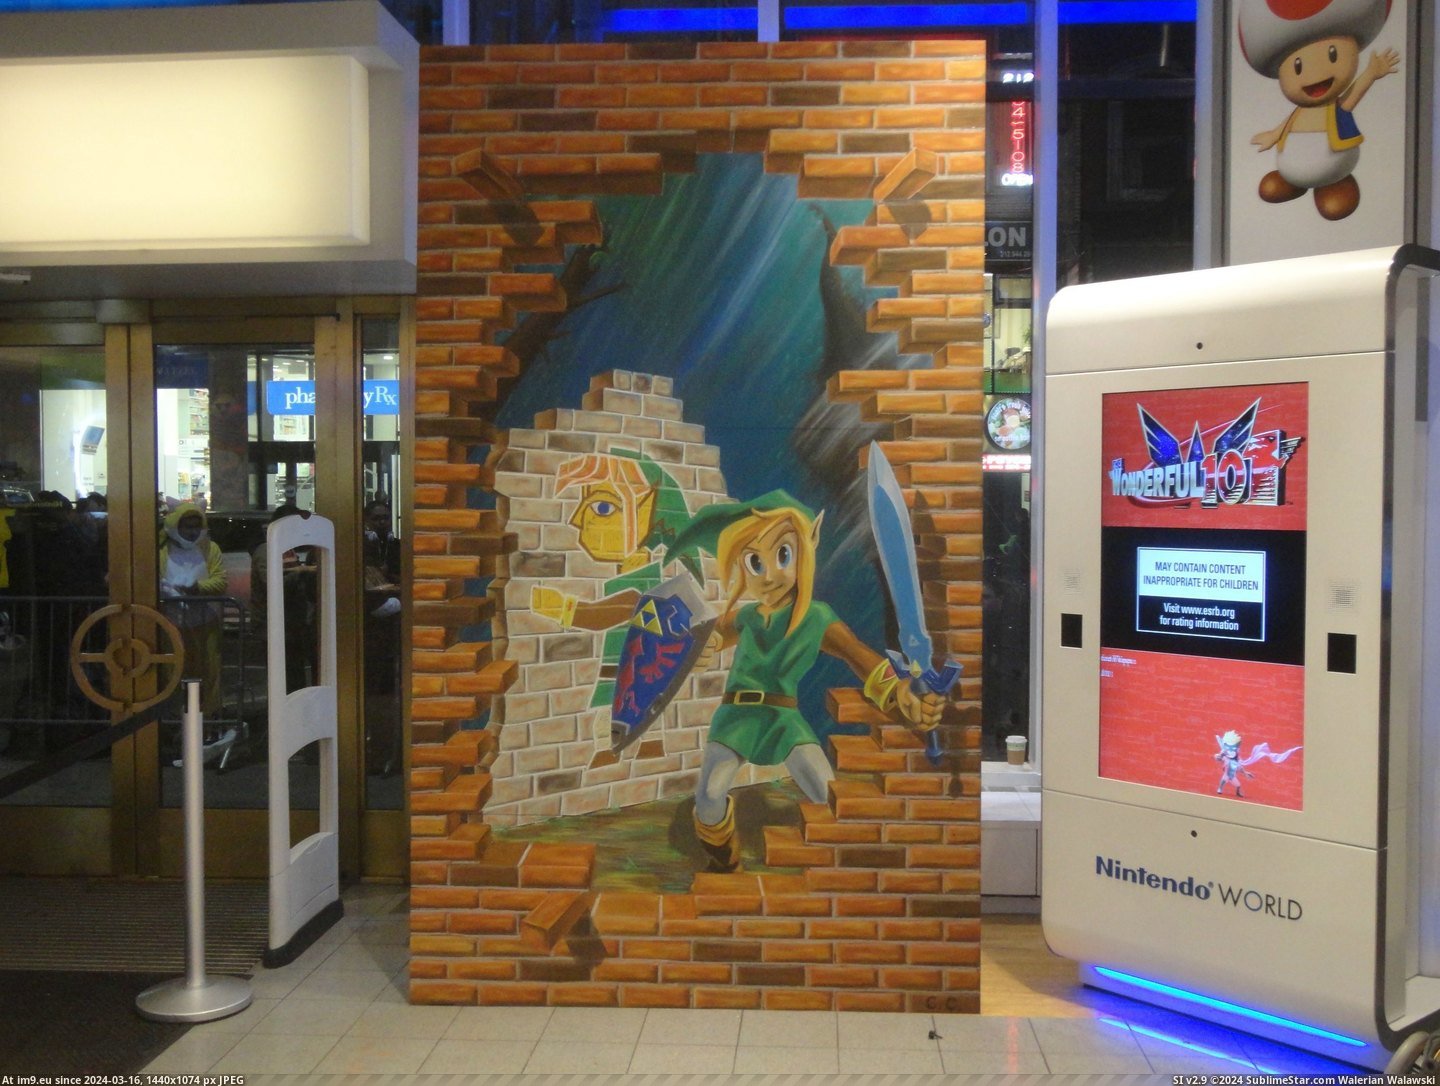 #Gaming #For #World #Drawing #Release #Event #Chalk #Night #Zelda #Nintendo [Gaming] I made this chalk drawing at Nintendo World for the Zelda release event last night Pic. (Bild von album My r/GAMING favs))